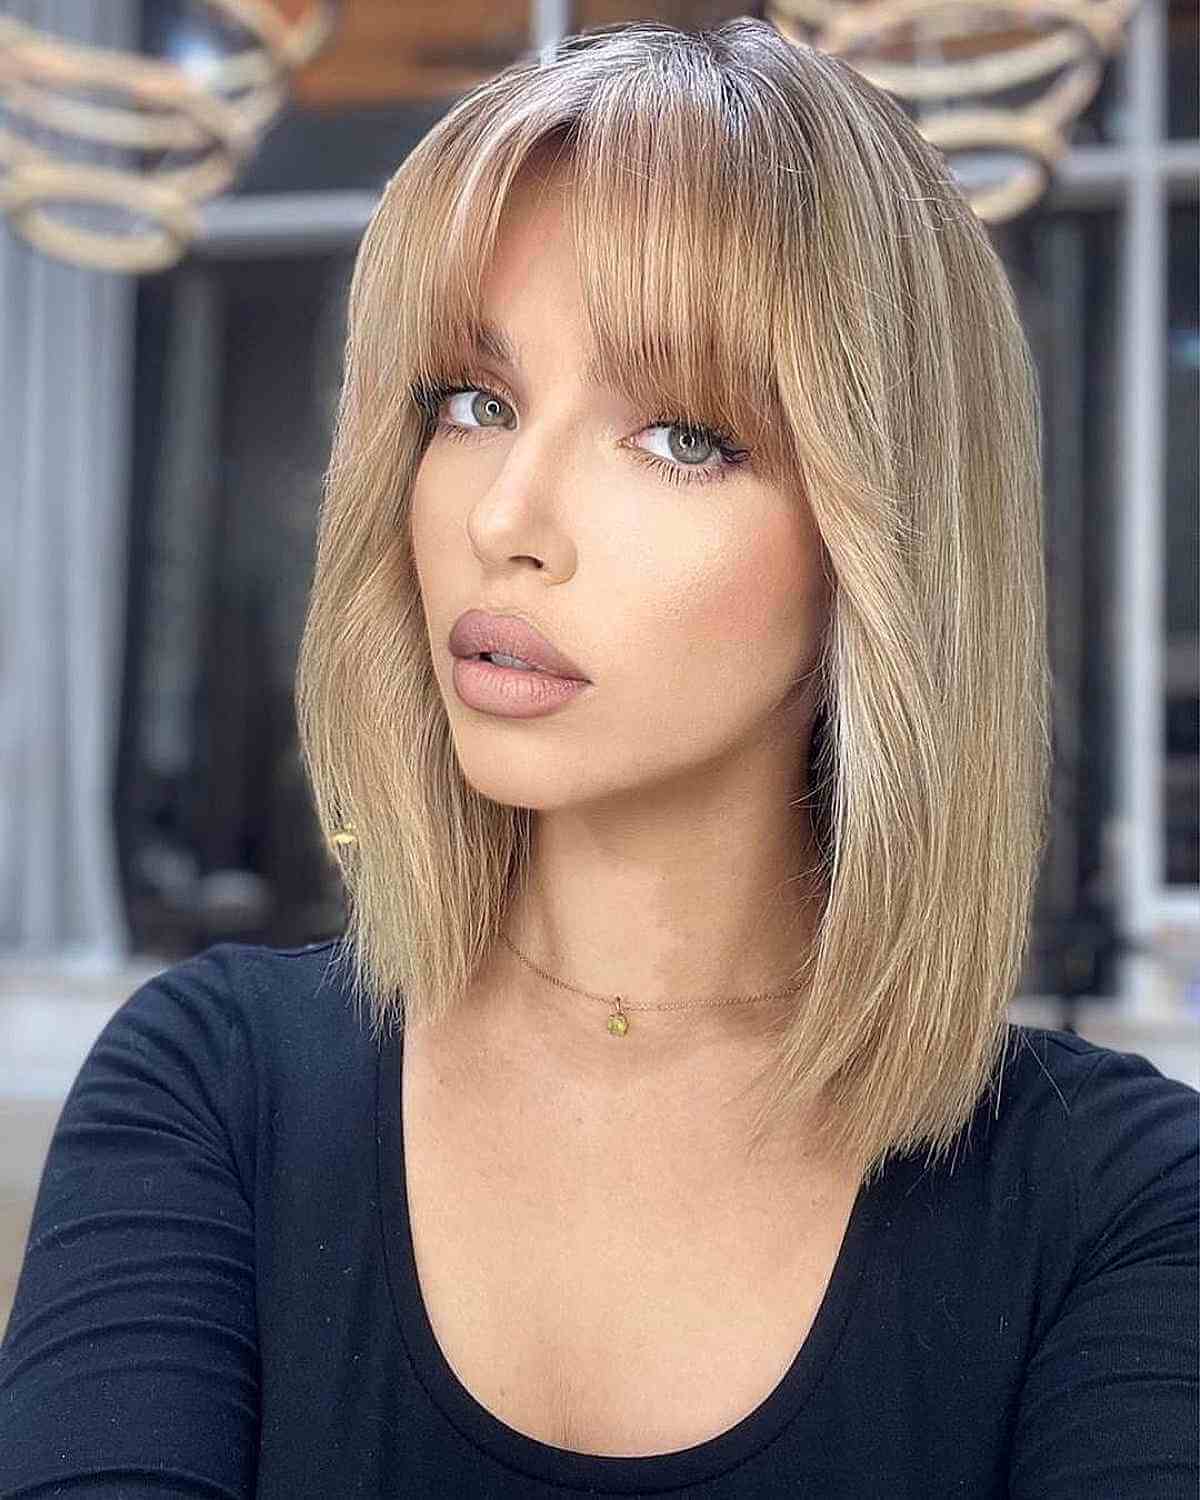 22 Volumizing Bobs with Bangs Women with Fine, Thin Hair Need to See